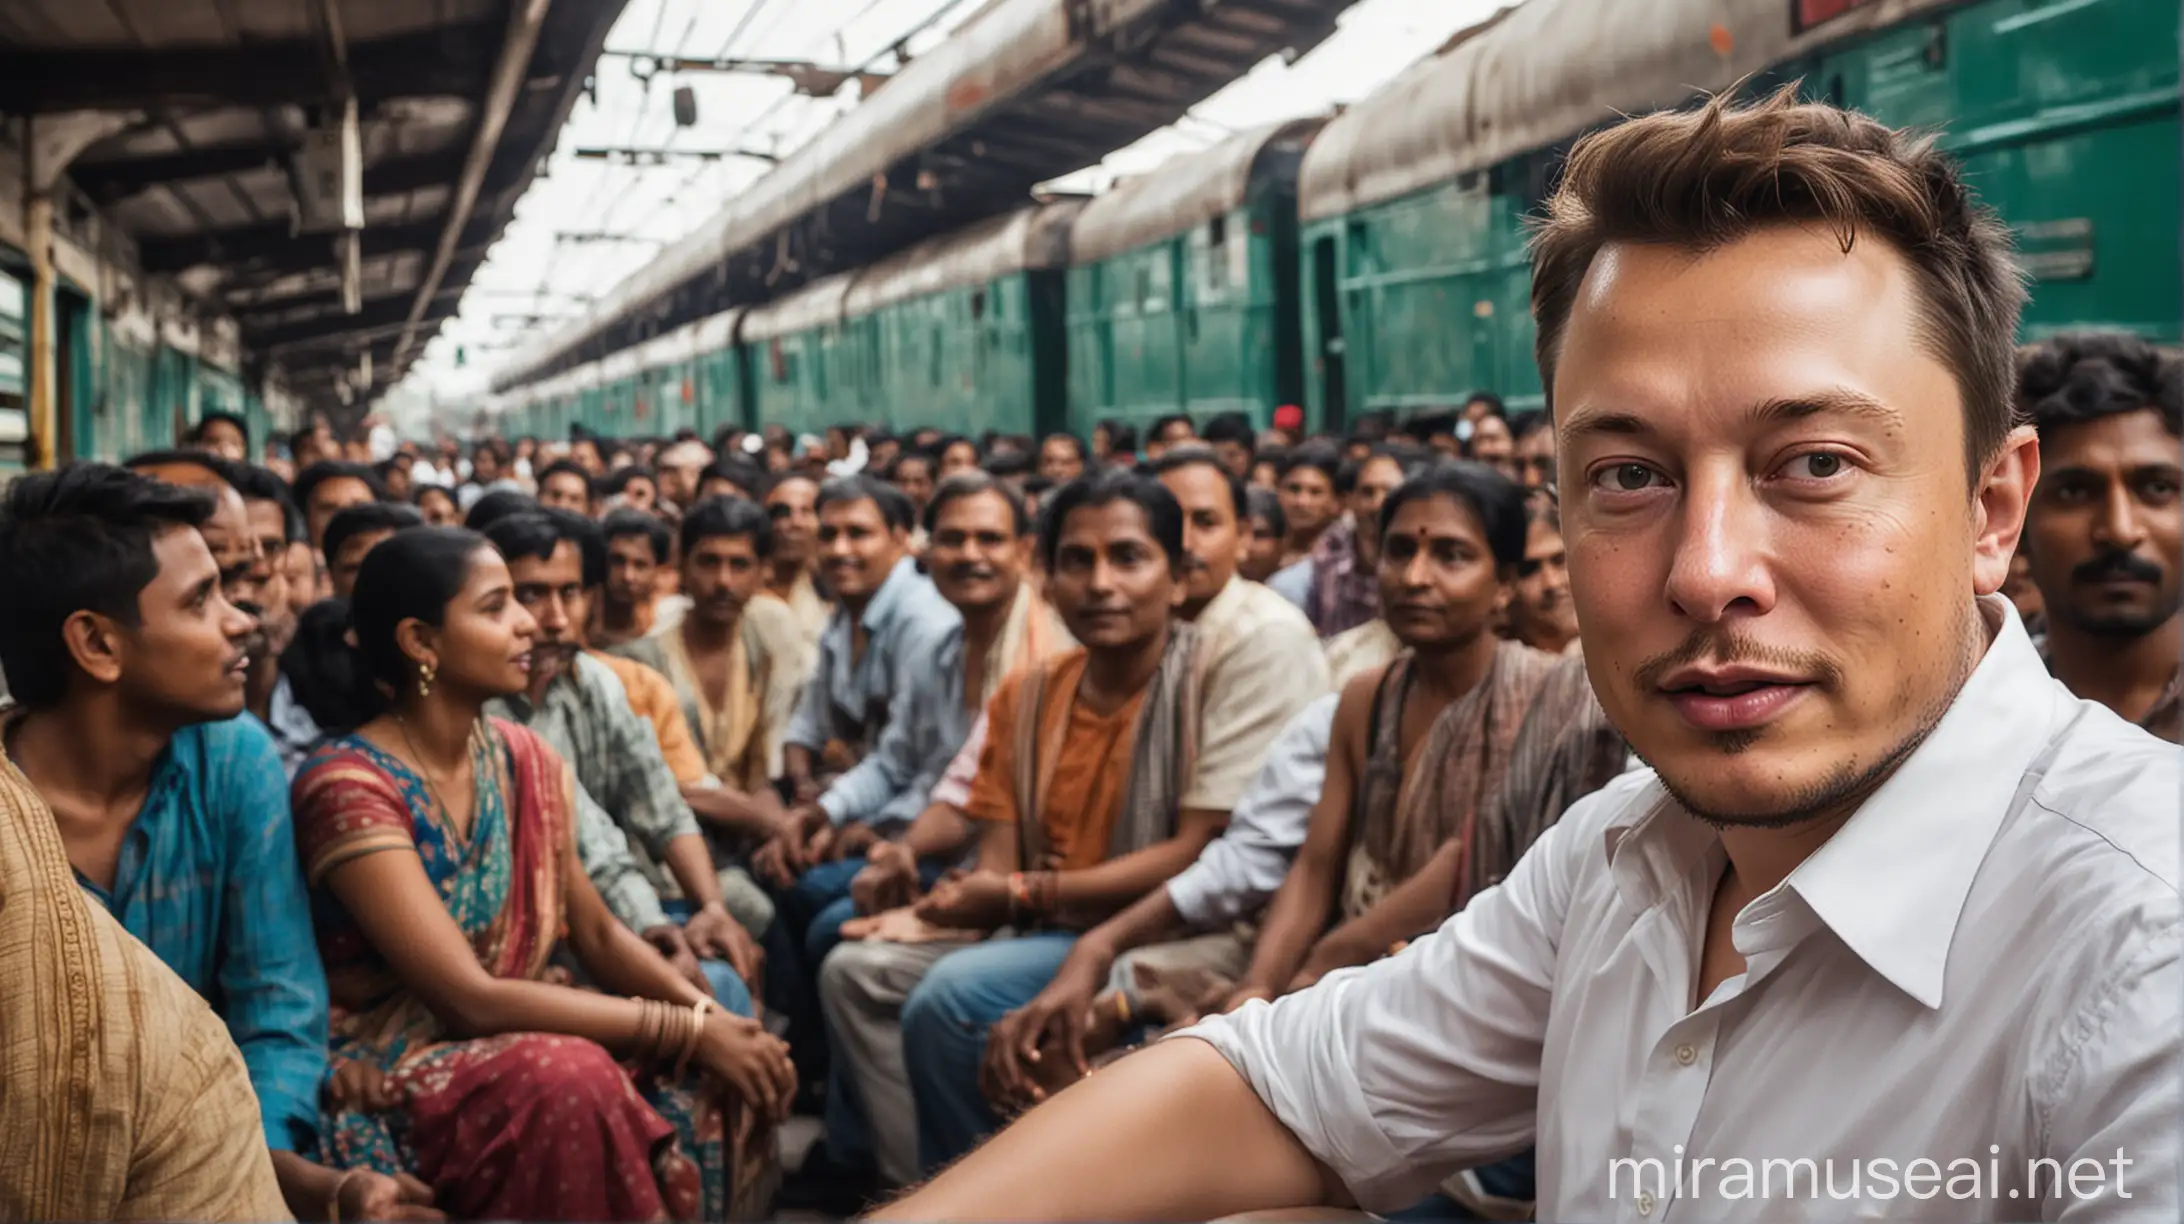 Generate a realistic AI photo of Elon Musk traveling in a local Indian train, surrounded by Indian people. Show the hot weather typical of India, with sweat glistening on faces, and the bustling atmosphere of the train with people sitting and standing around him. Capture the essence of cultural exchange and Elon Musk's immersion in the local Indian experience